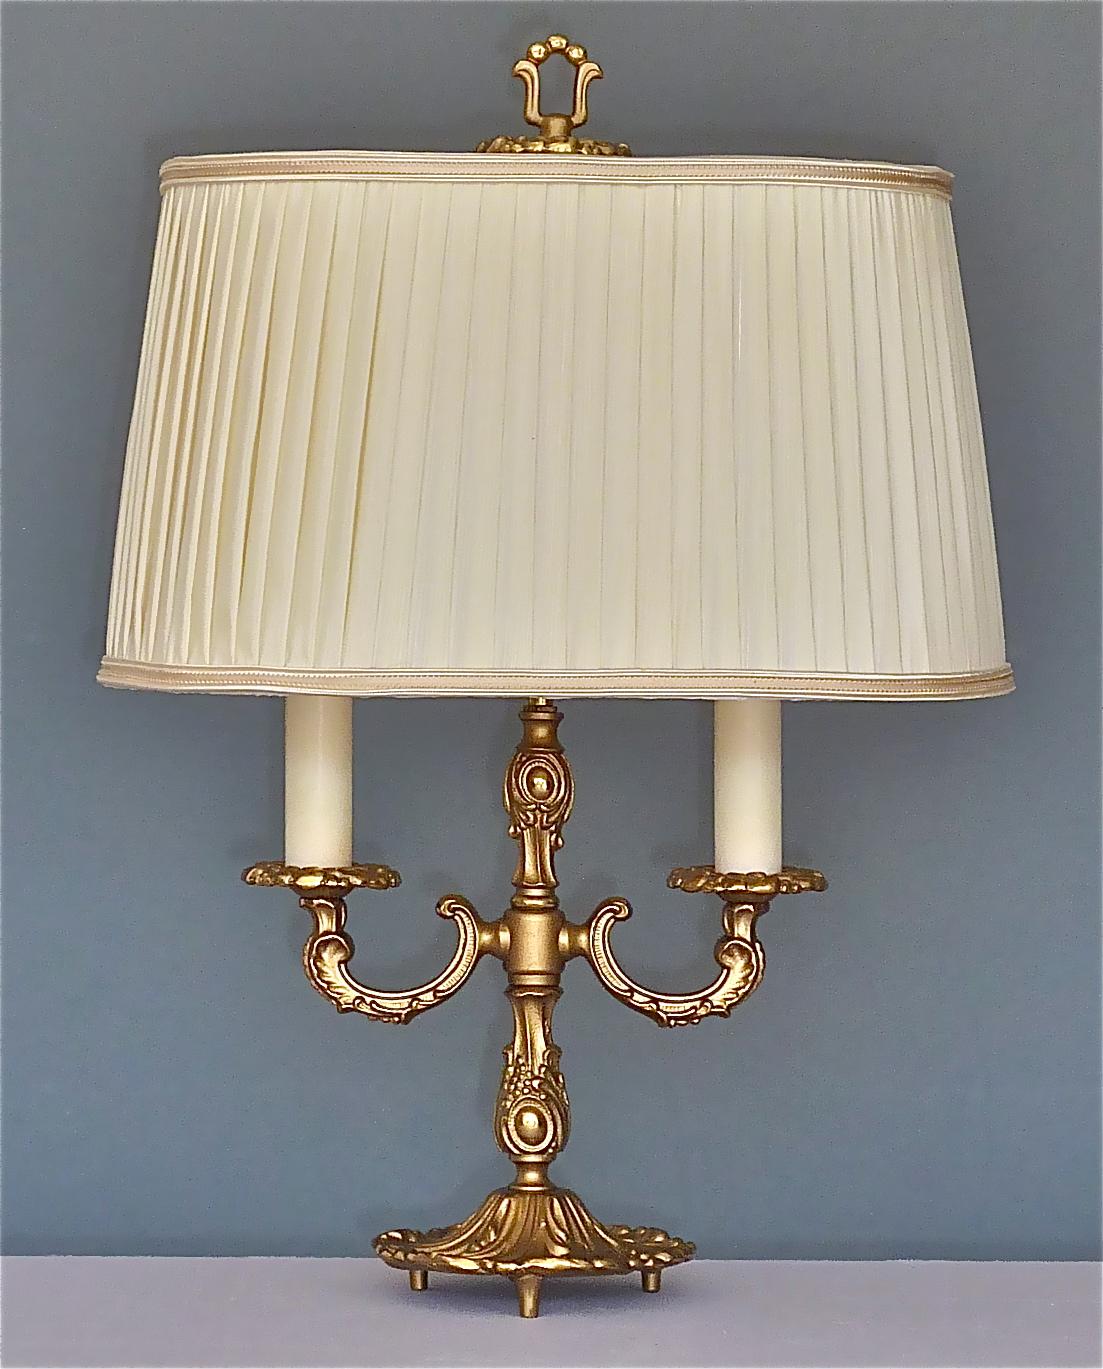 Baroque Maison Jansen Style Midcentury Table Lamp Brass Leaf Decor Germany 1950s For Sale 10